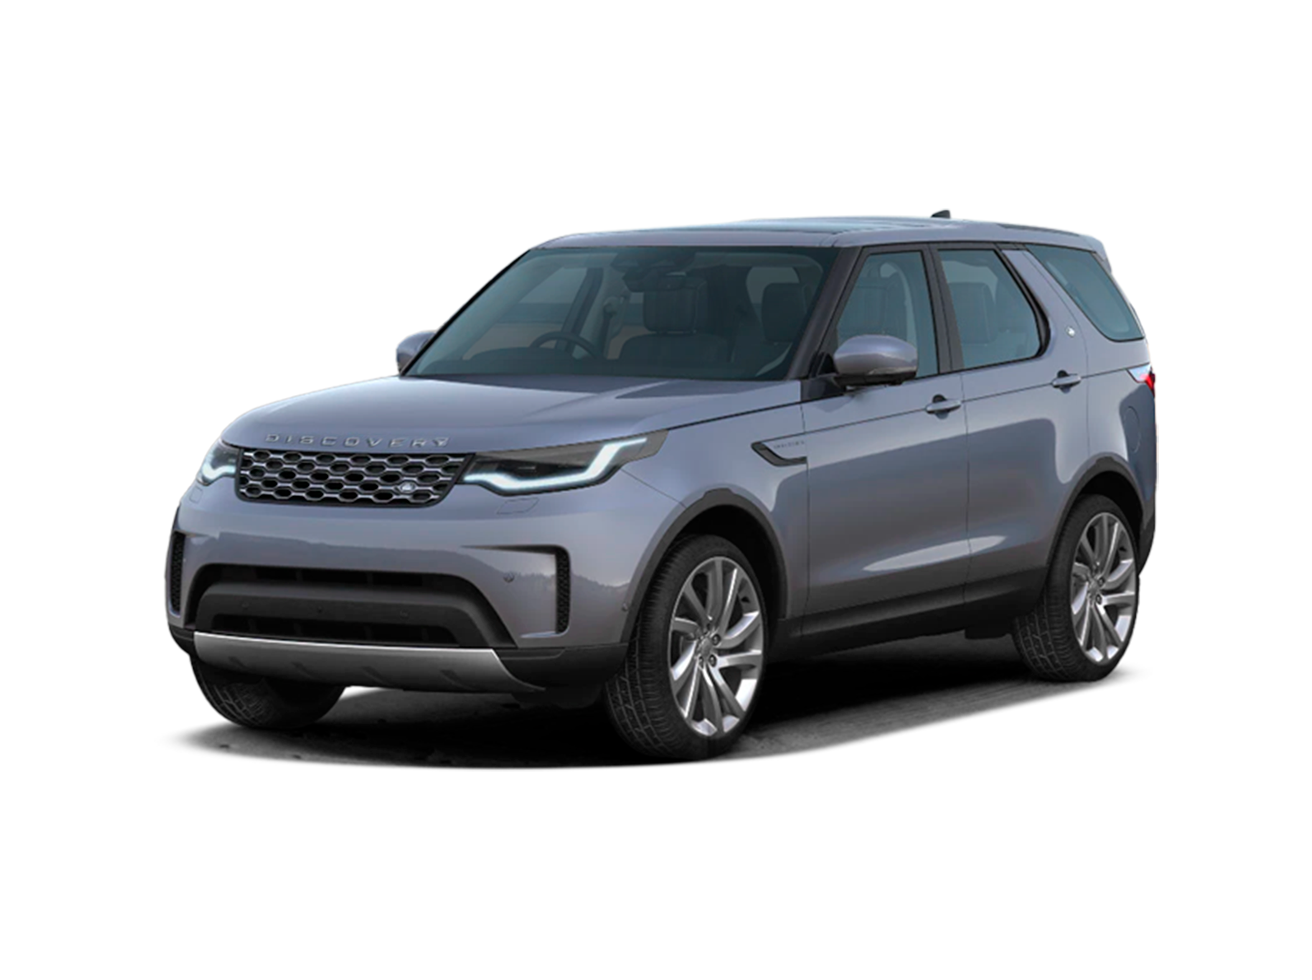 LAND ROVER - DISCOVERY - 3.0 V6 TD6 DIESEL HSE 4WD AUTOMÁTICO